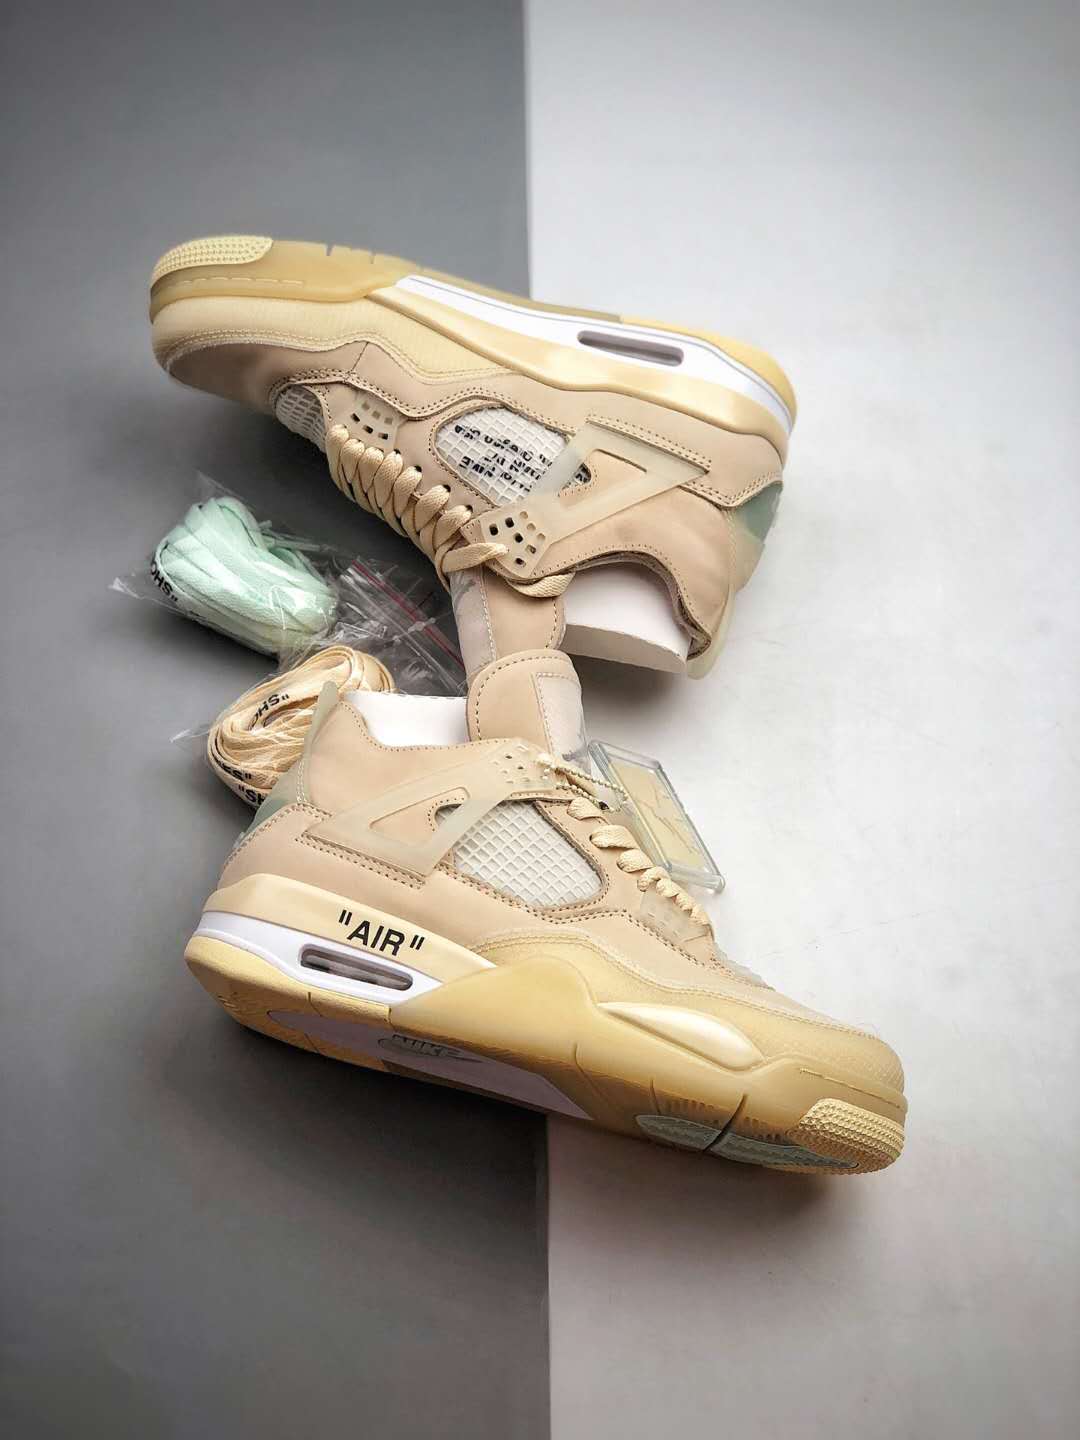 Off-White x Air Jordan 4 SP 'Sail' CV9388-100 – Limited Edition Collaboration | High-End Sneakers